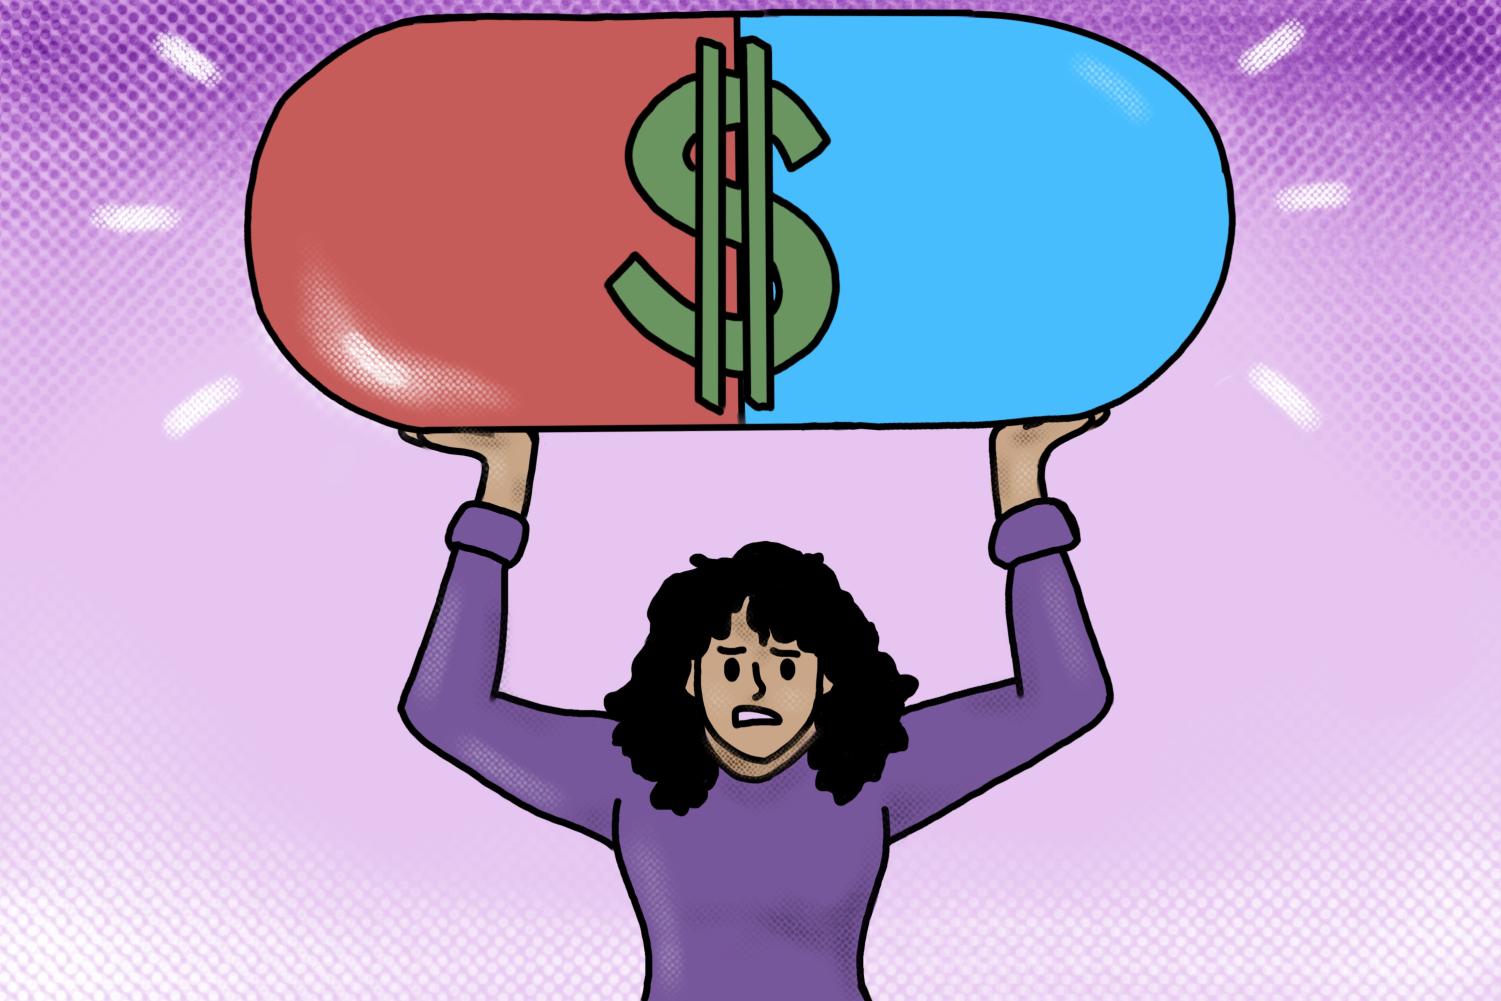 An+illustration+of+a+person+in+a+purple+sweater+holding+a+pill+%E2%80%94+red+in+one+half%2C+blue+another+%E2%80%94+that+has+a+green+dollar+sign+in+front+of+it.